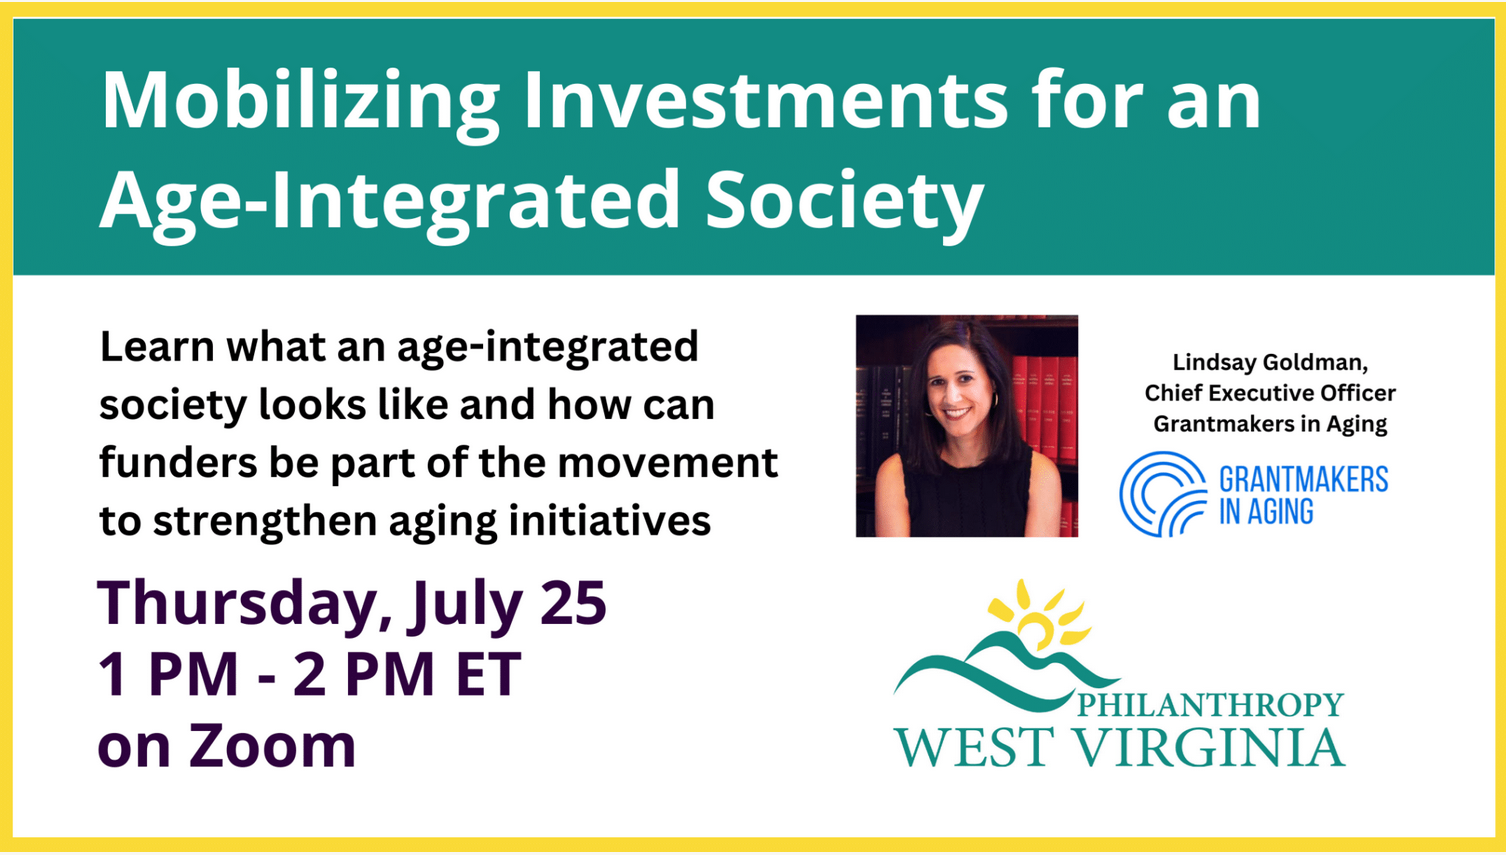 Mobilizing Investments for an Age-Integrated Society